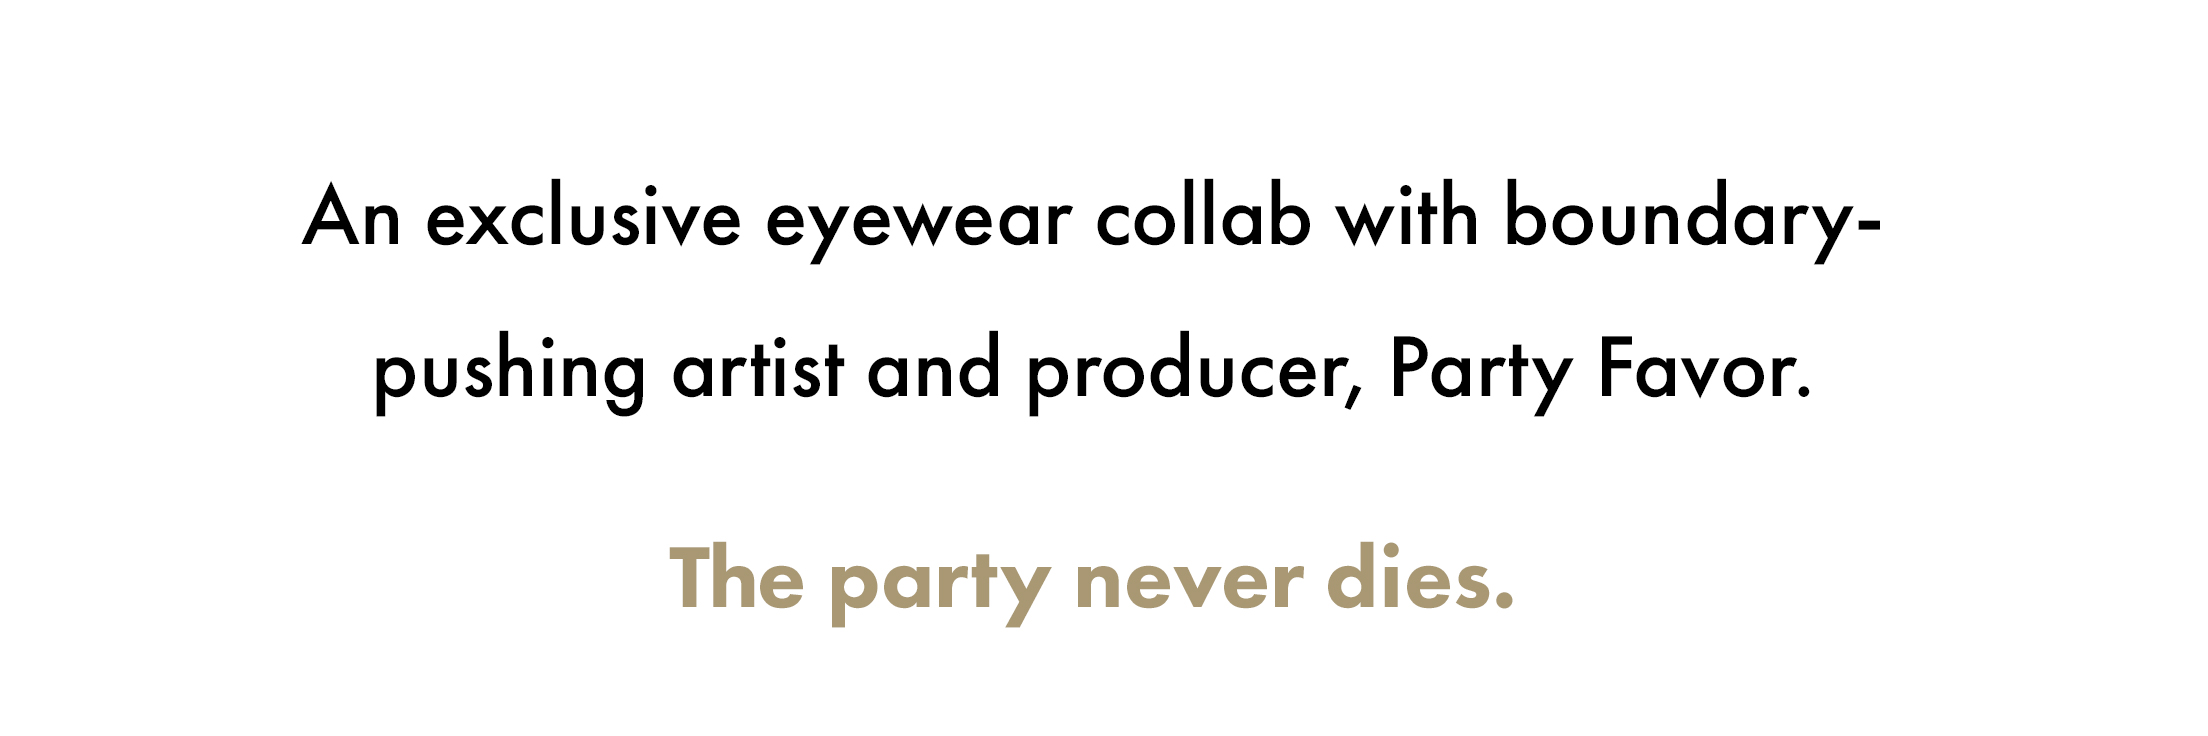 An exclusive eyewear collab with boundary-pushing artist and producer, Party Favor. The party never dies.